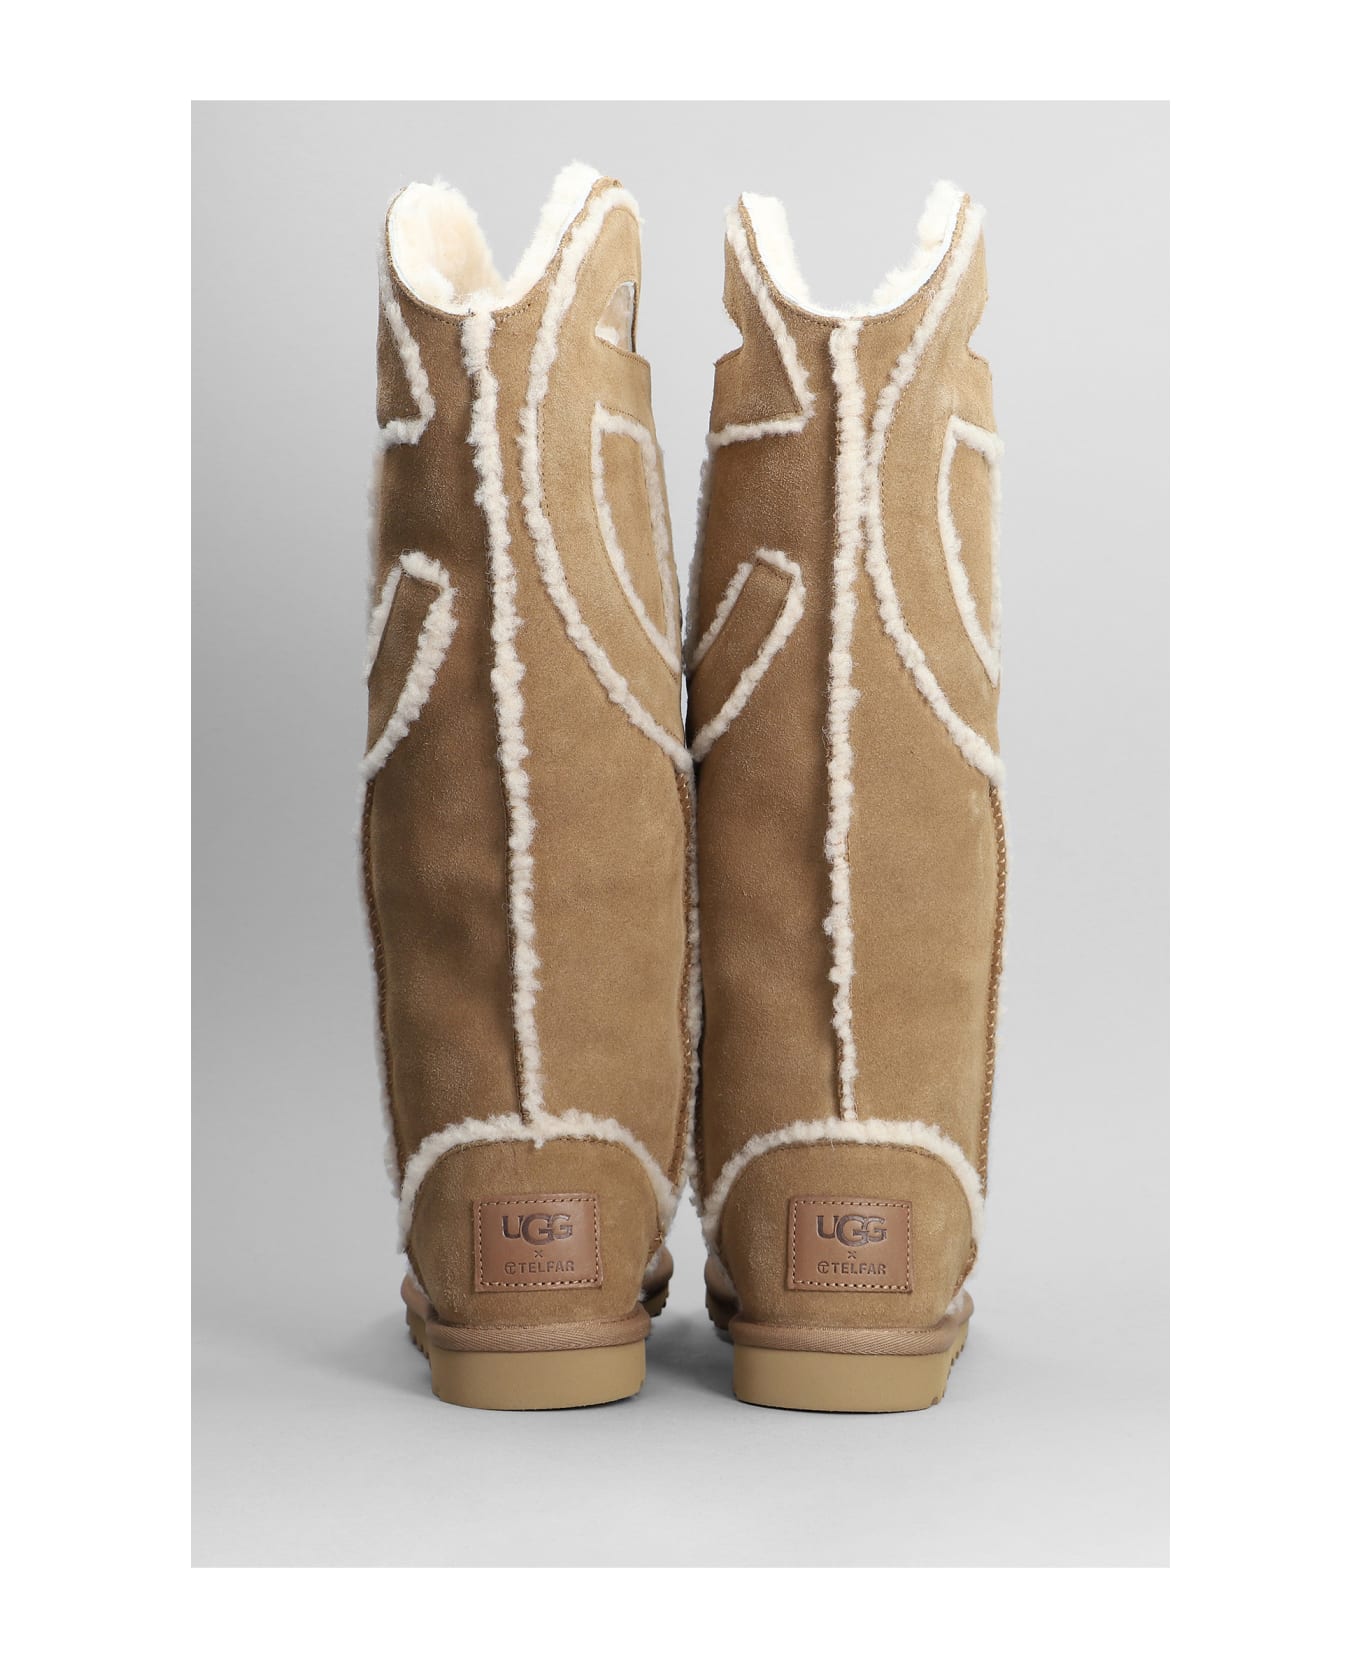 UGG Logo Tall Boot Low Heels Boots In Leather Color Suede - Brown ブーツ